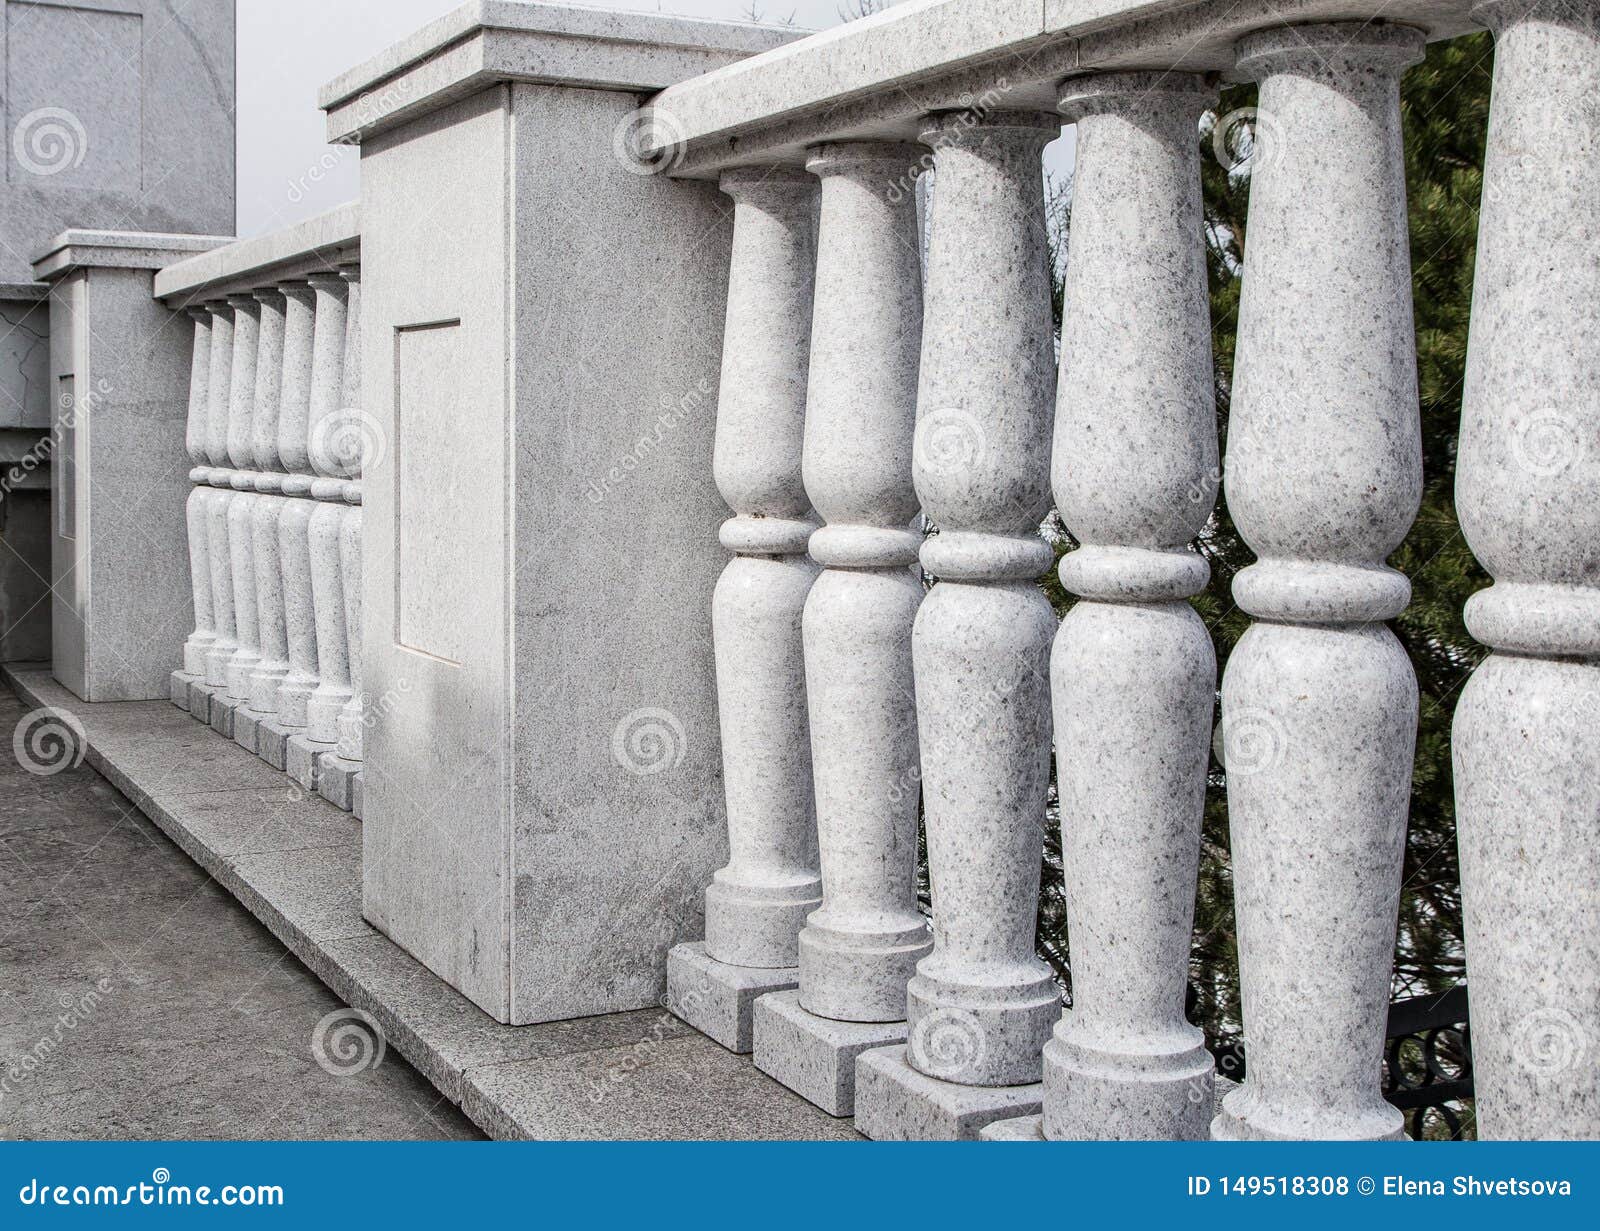 421 Granite Balustrade Photos Free Royalty Free Stock Photos From Dreamstime